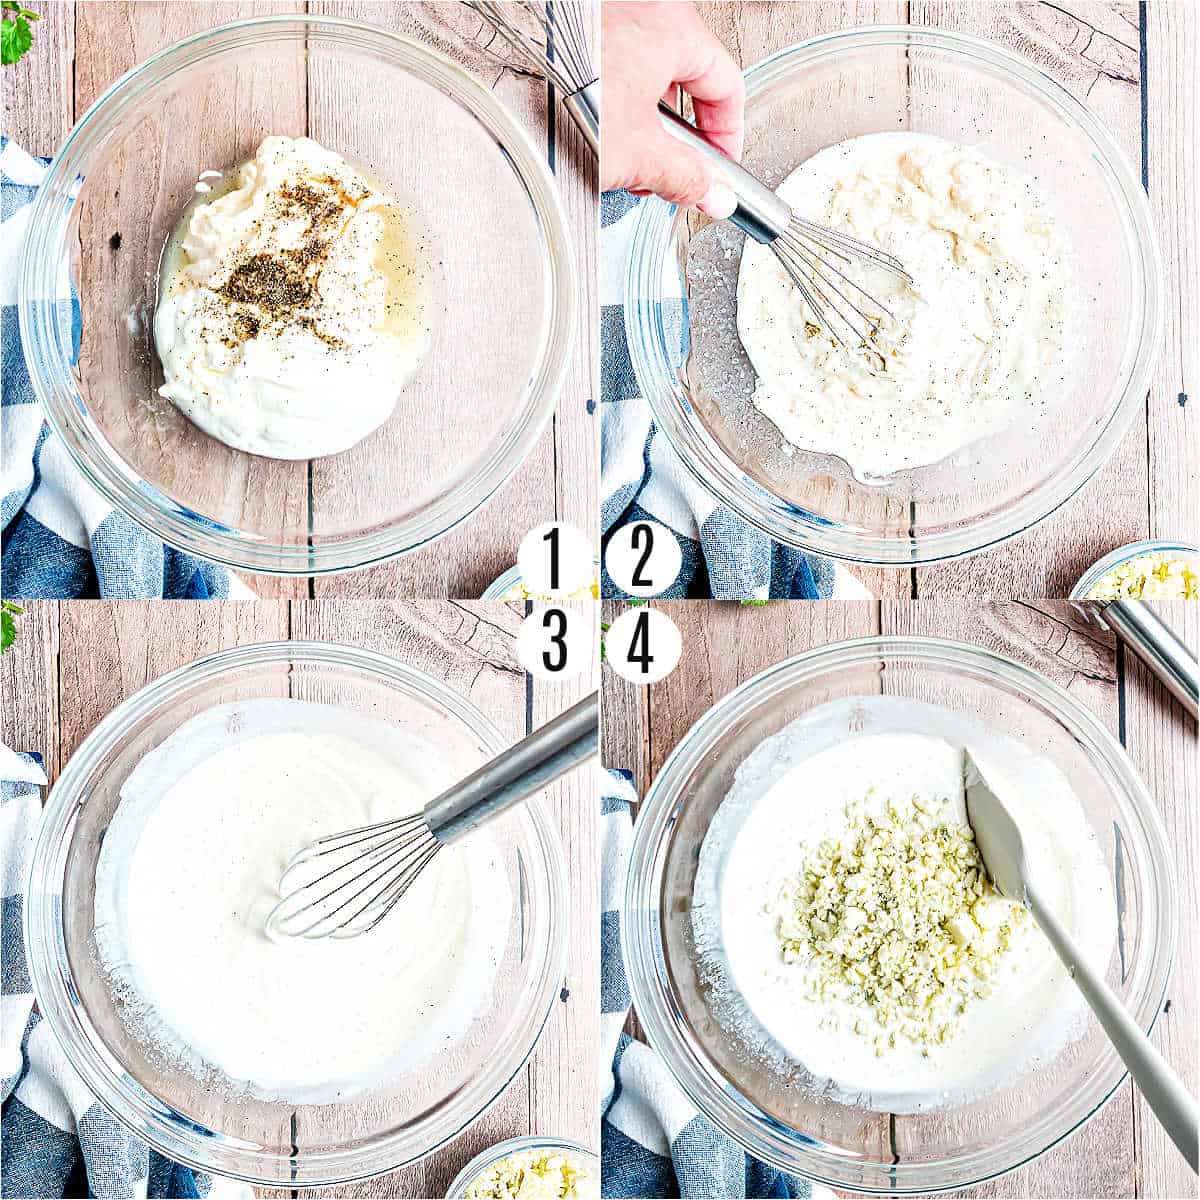 Step by step photos showing how to make blue cheese dressing.